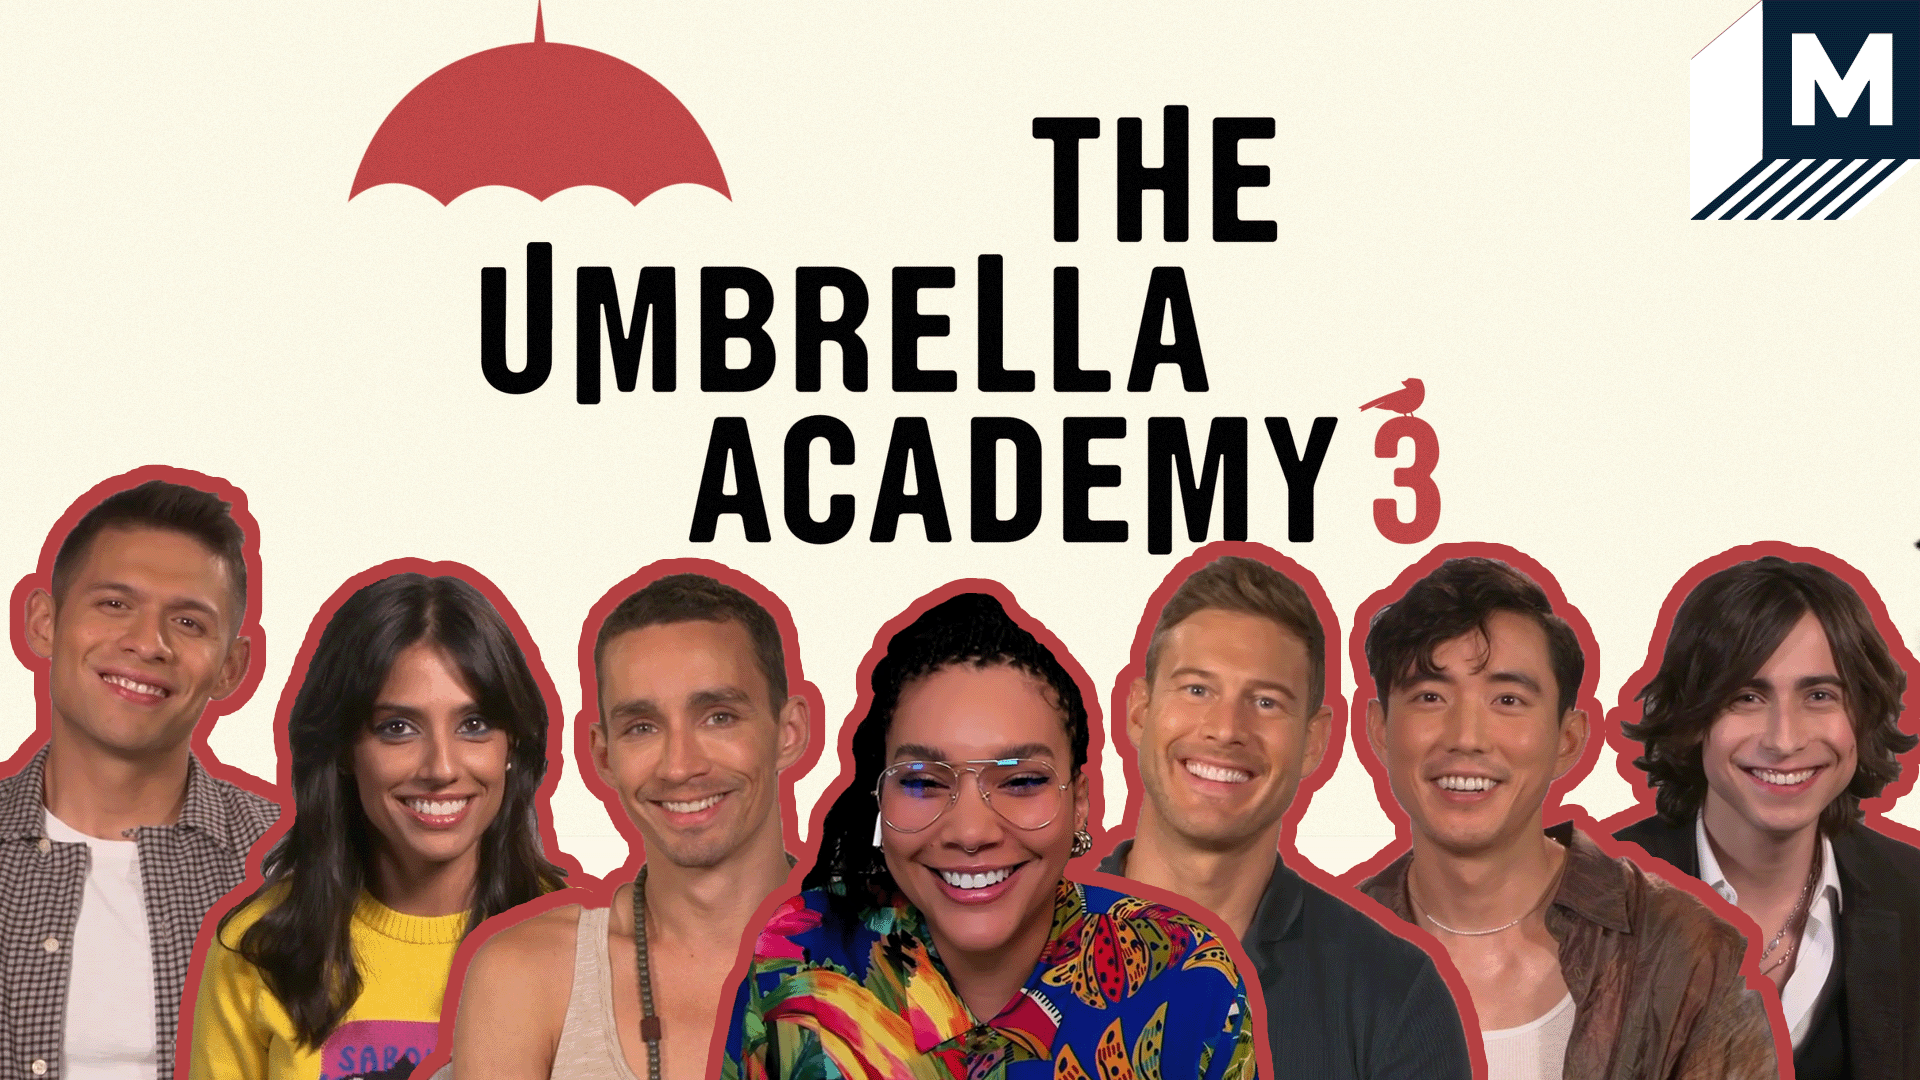 The cast of The Umbrella Academy smiles in front of the poster of The Umbrella Academy 3